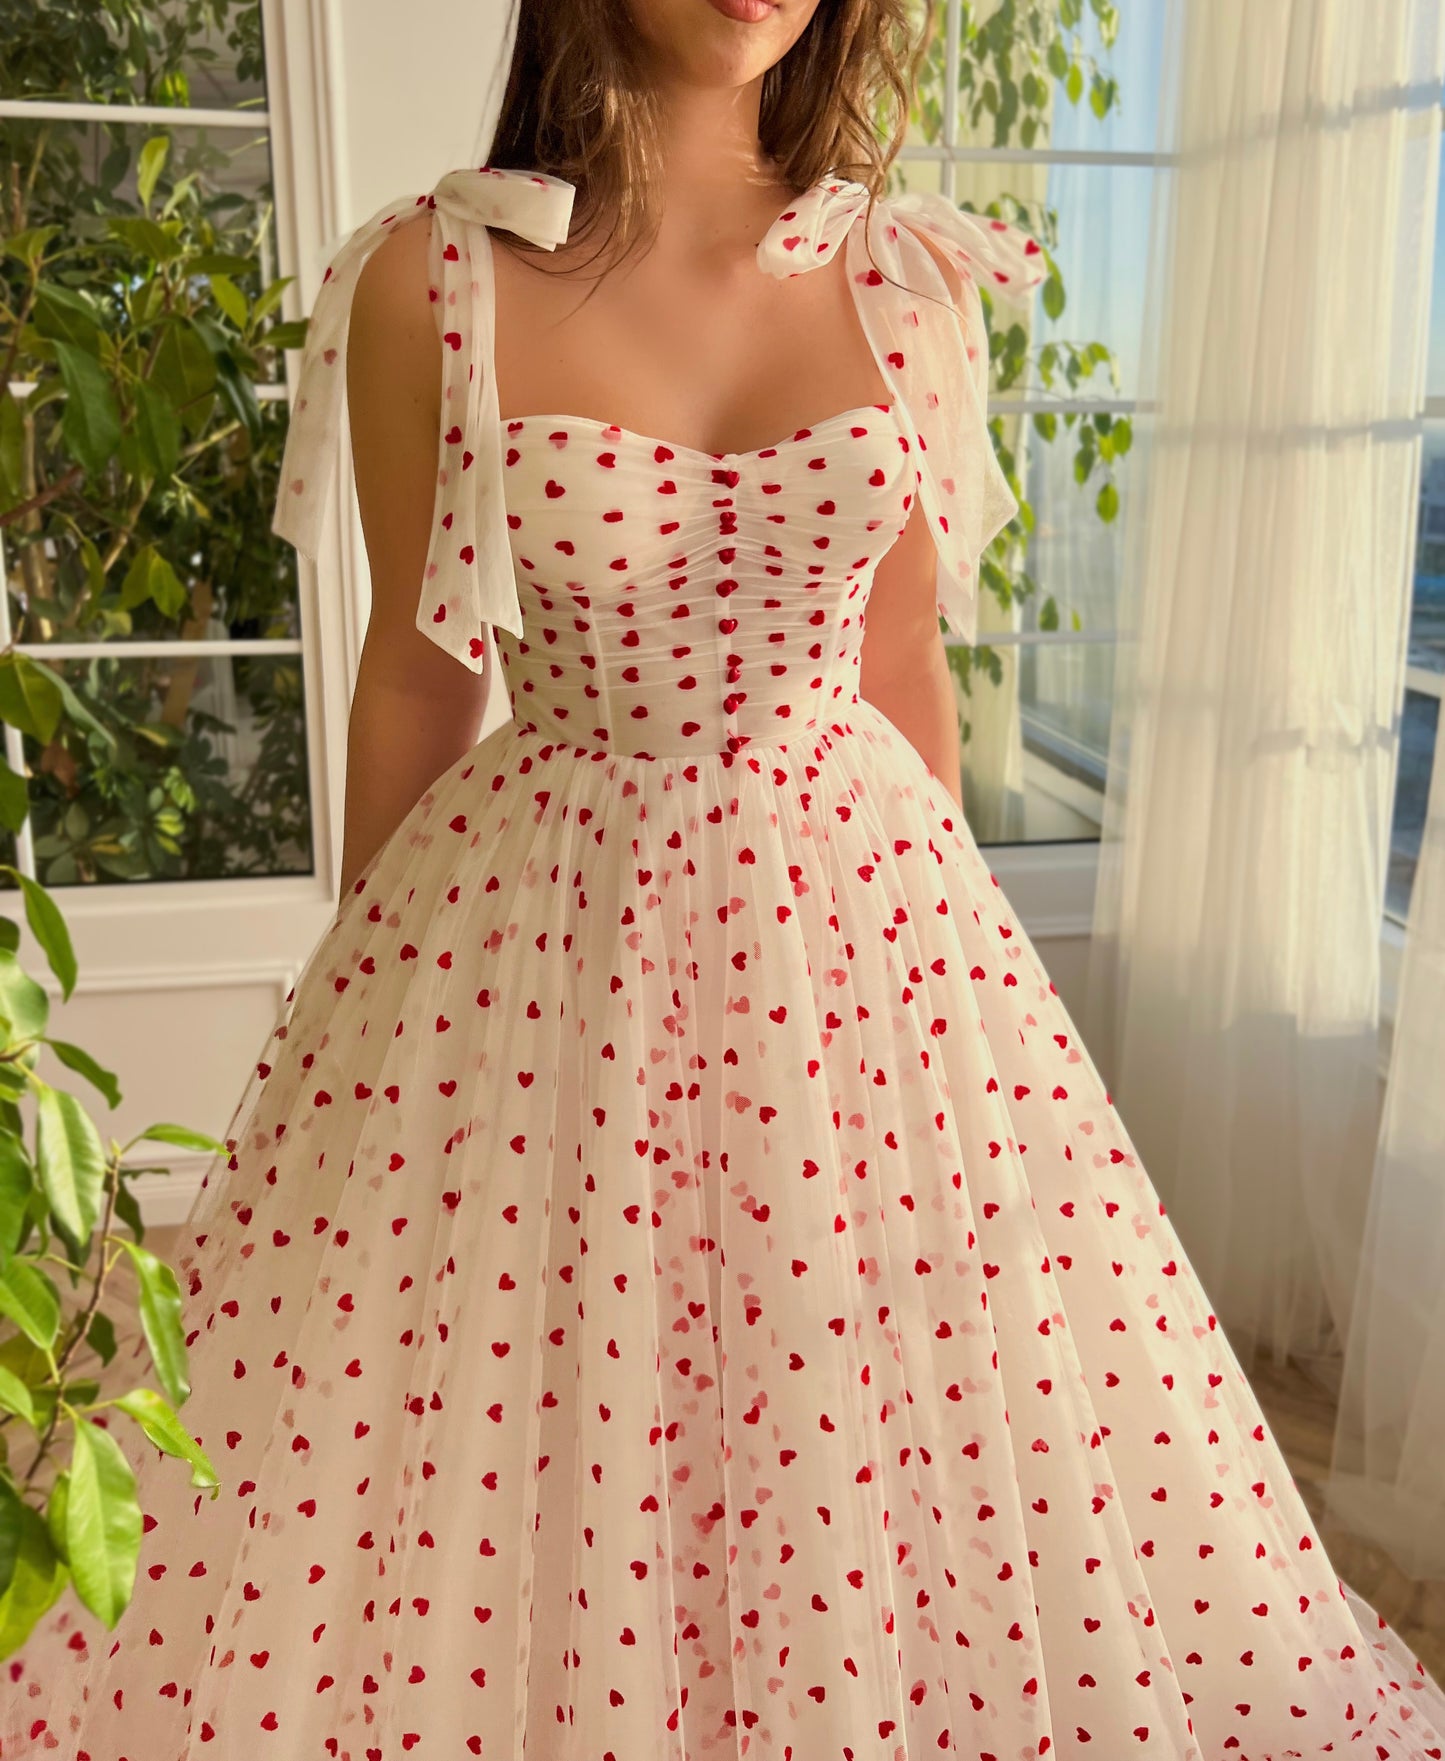 White A-Line dress with hearty print and bow straps